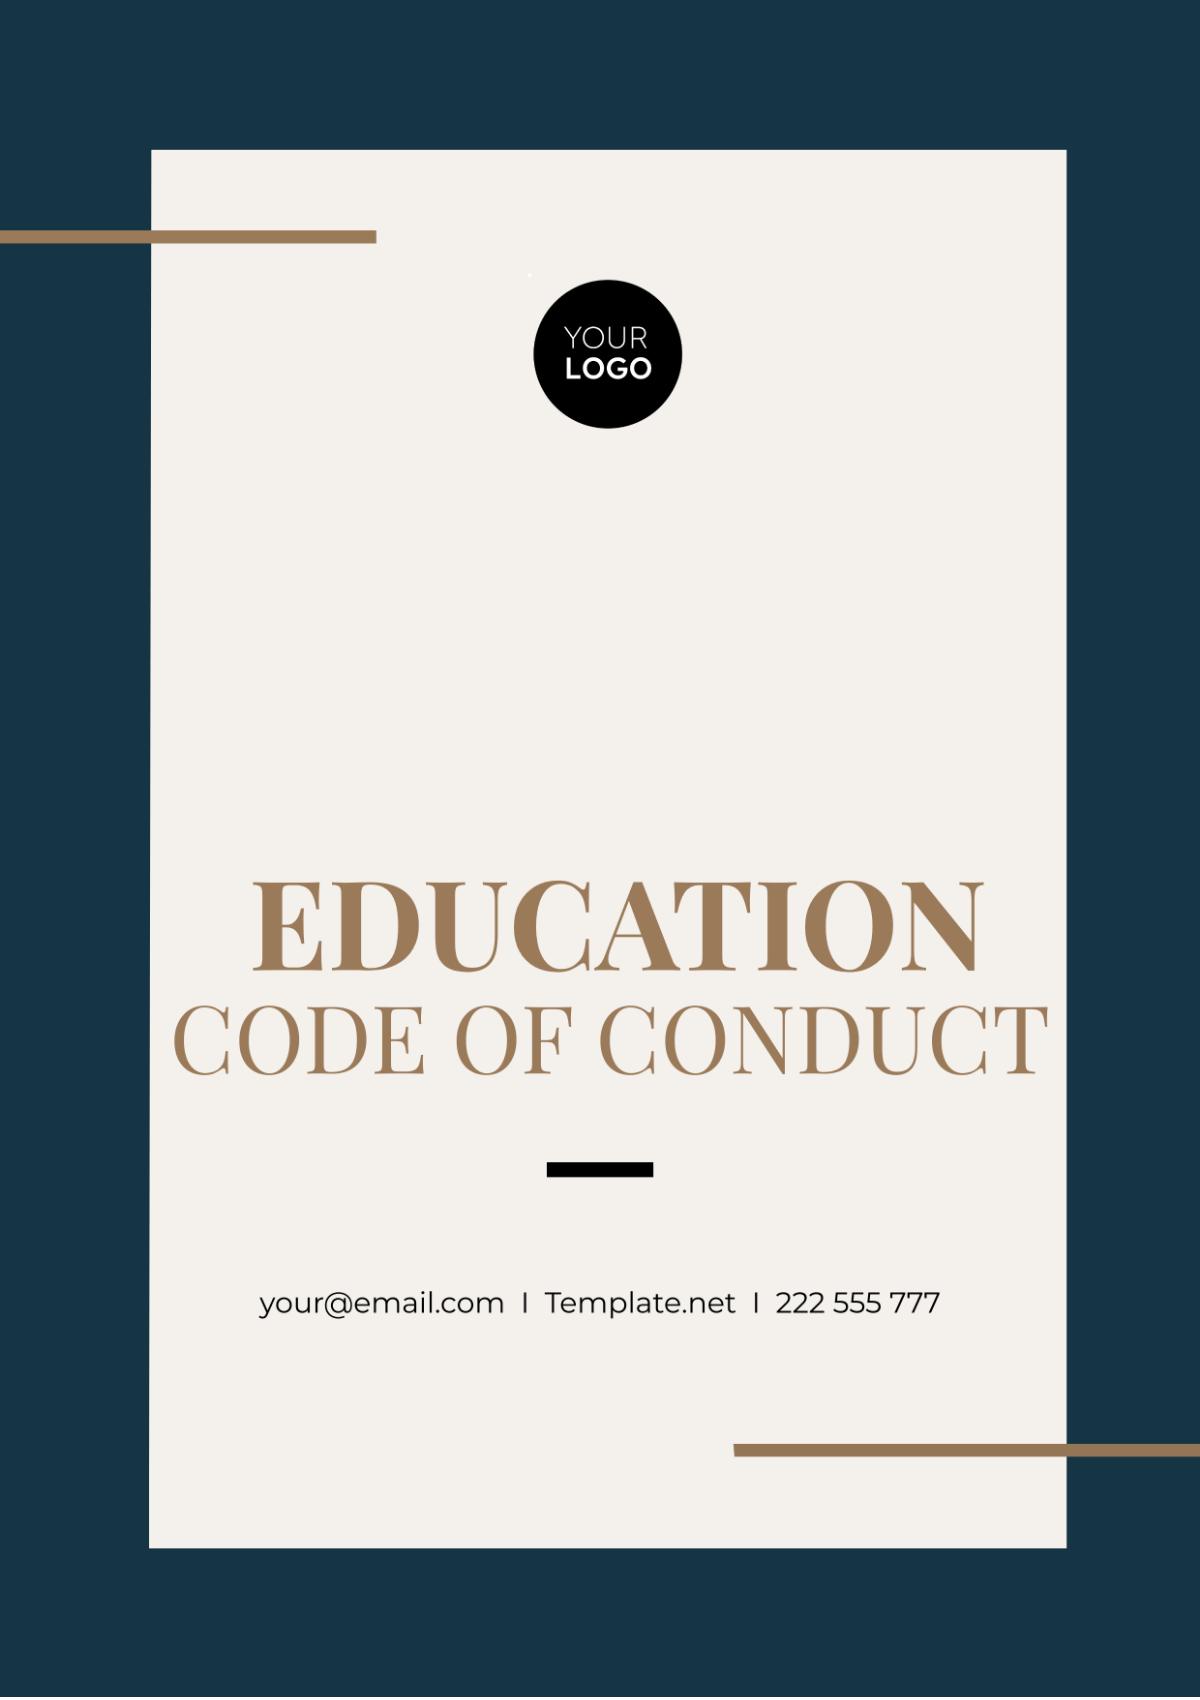 Education Code of Conduct Template